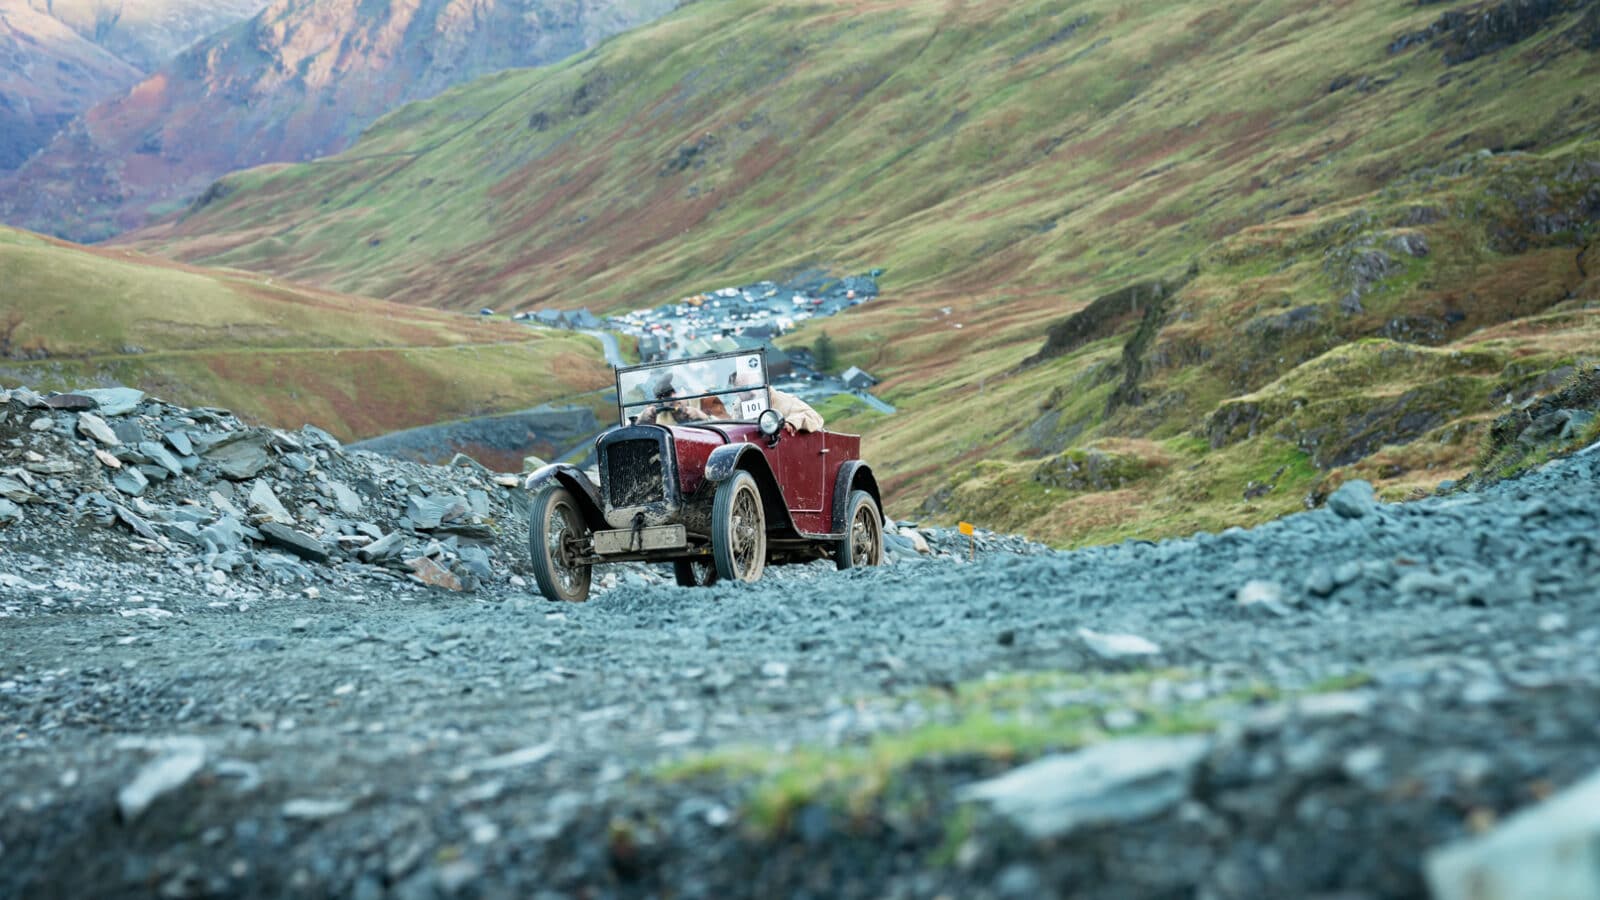 VSCC-ers tackle the slate tracks of the Lakes